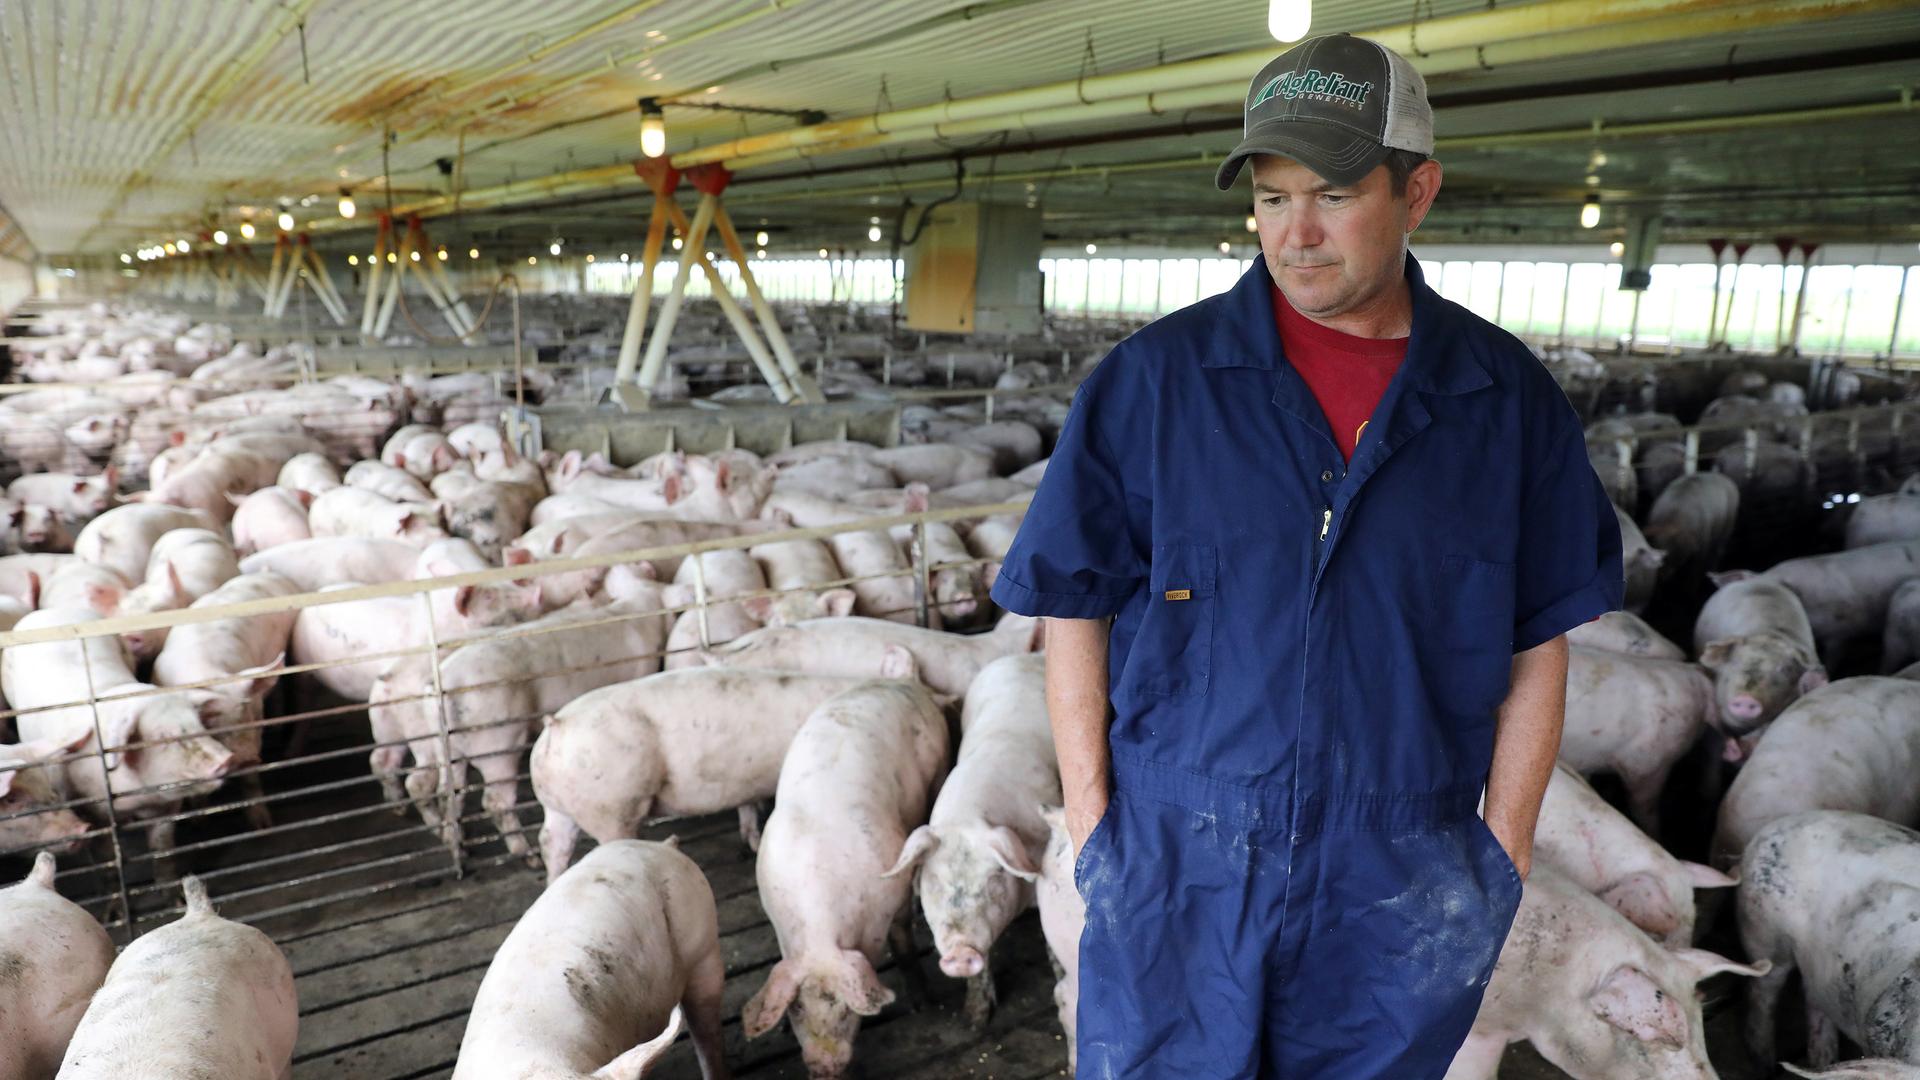 Iowa farmer Bruce Wessling walks through his farm. Iowa is the nation’s leading pork exporting state. China put a 25 percent tariff on imported American pork back in April.